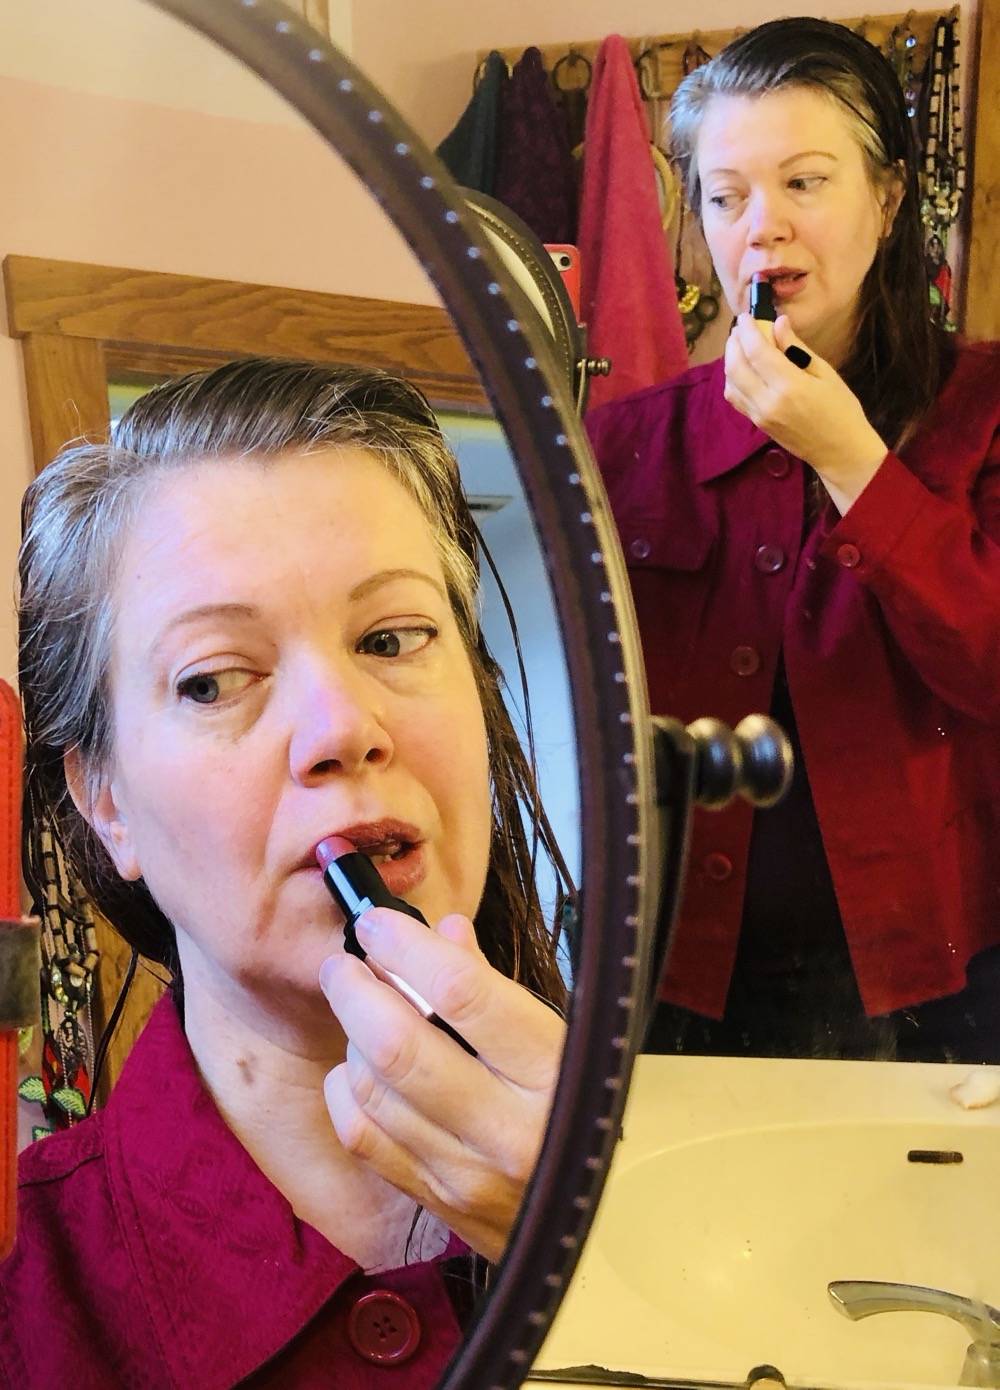 A woman looks into a large bathroom vanity mirror. She is putting on lipstick. The reflection also appears in a smaller, round countertop mirror. Photo by Danielle Chynoweth. 